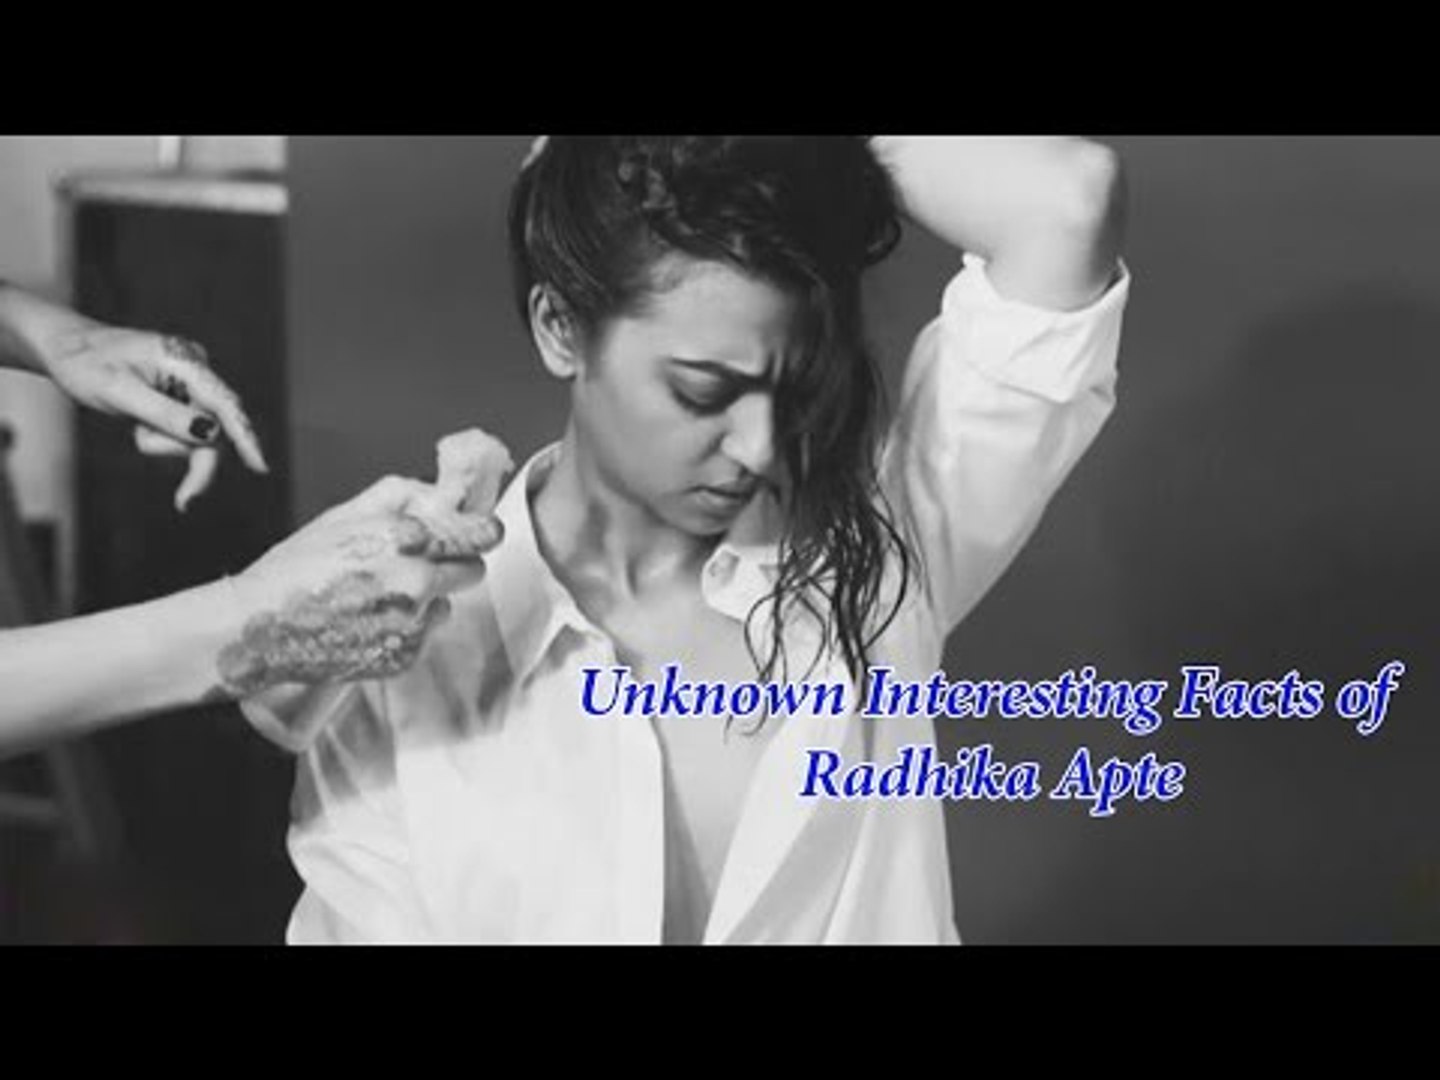 Radhika Apte's Unknown Interesting Facts | Watch Video - video Dailymotion